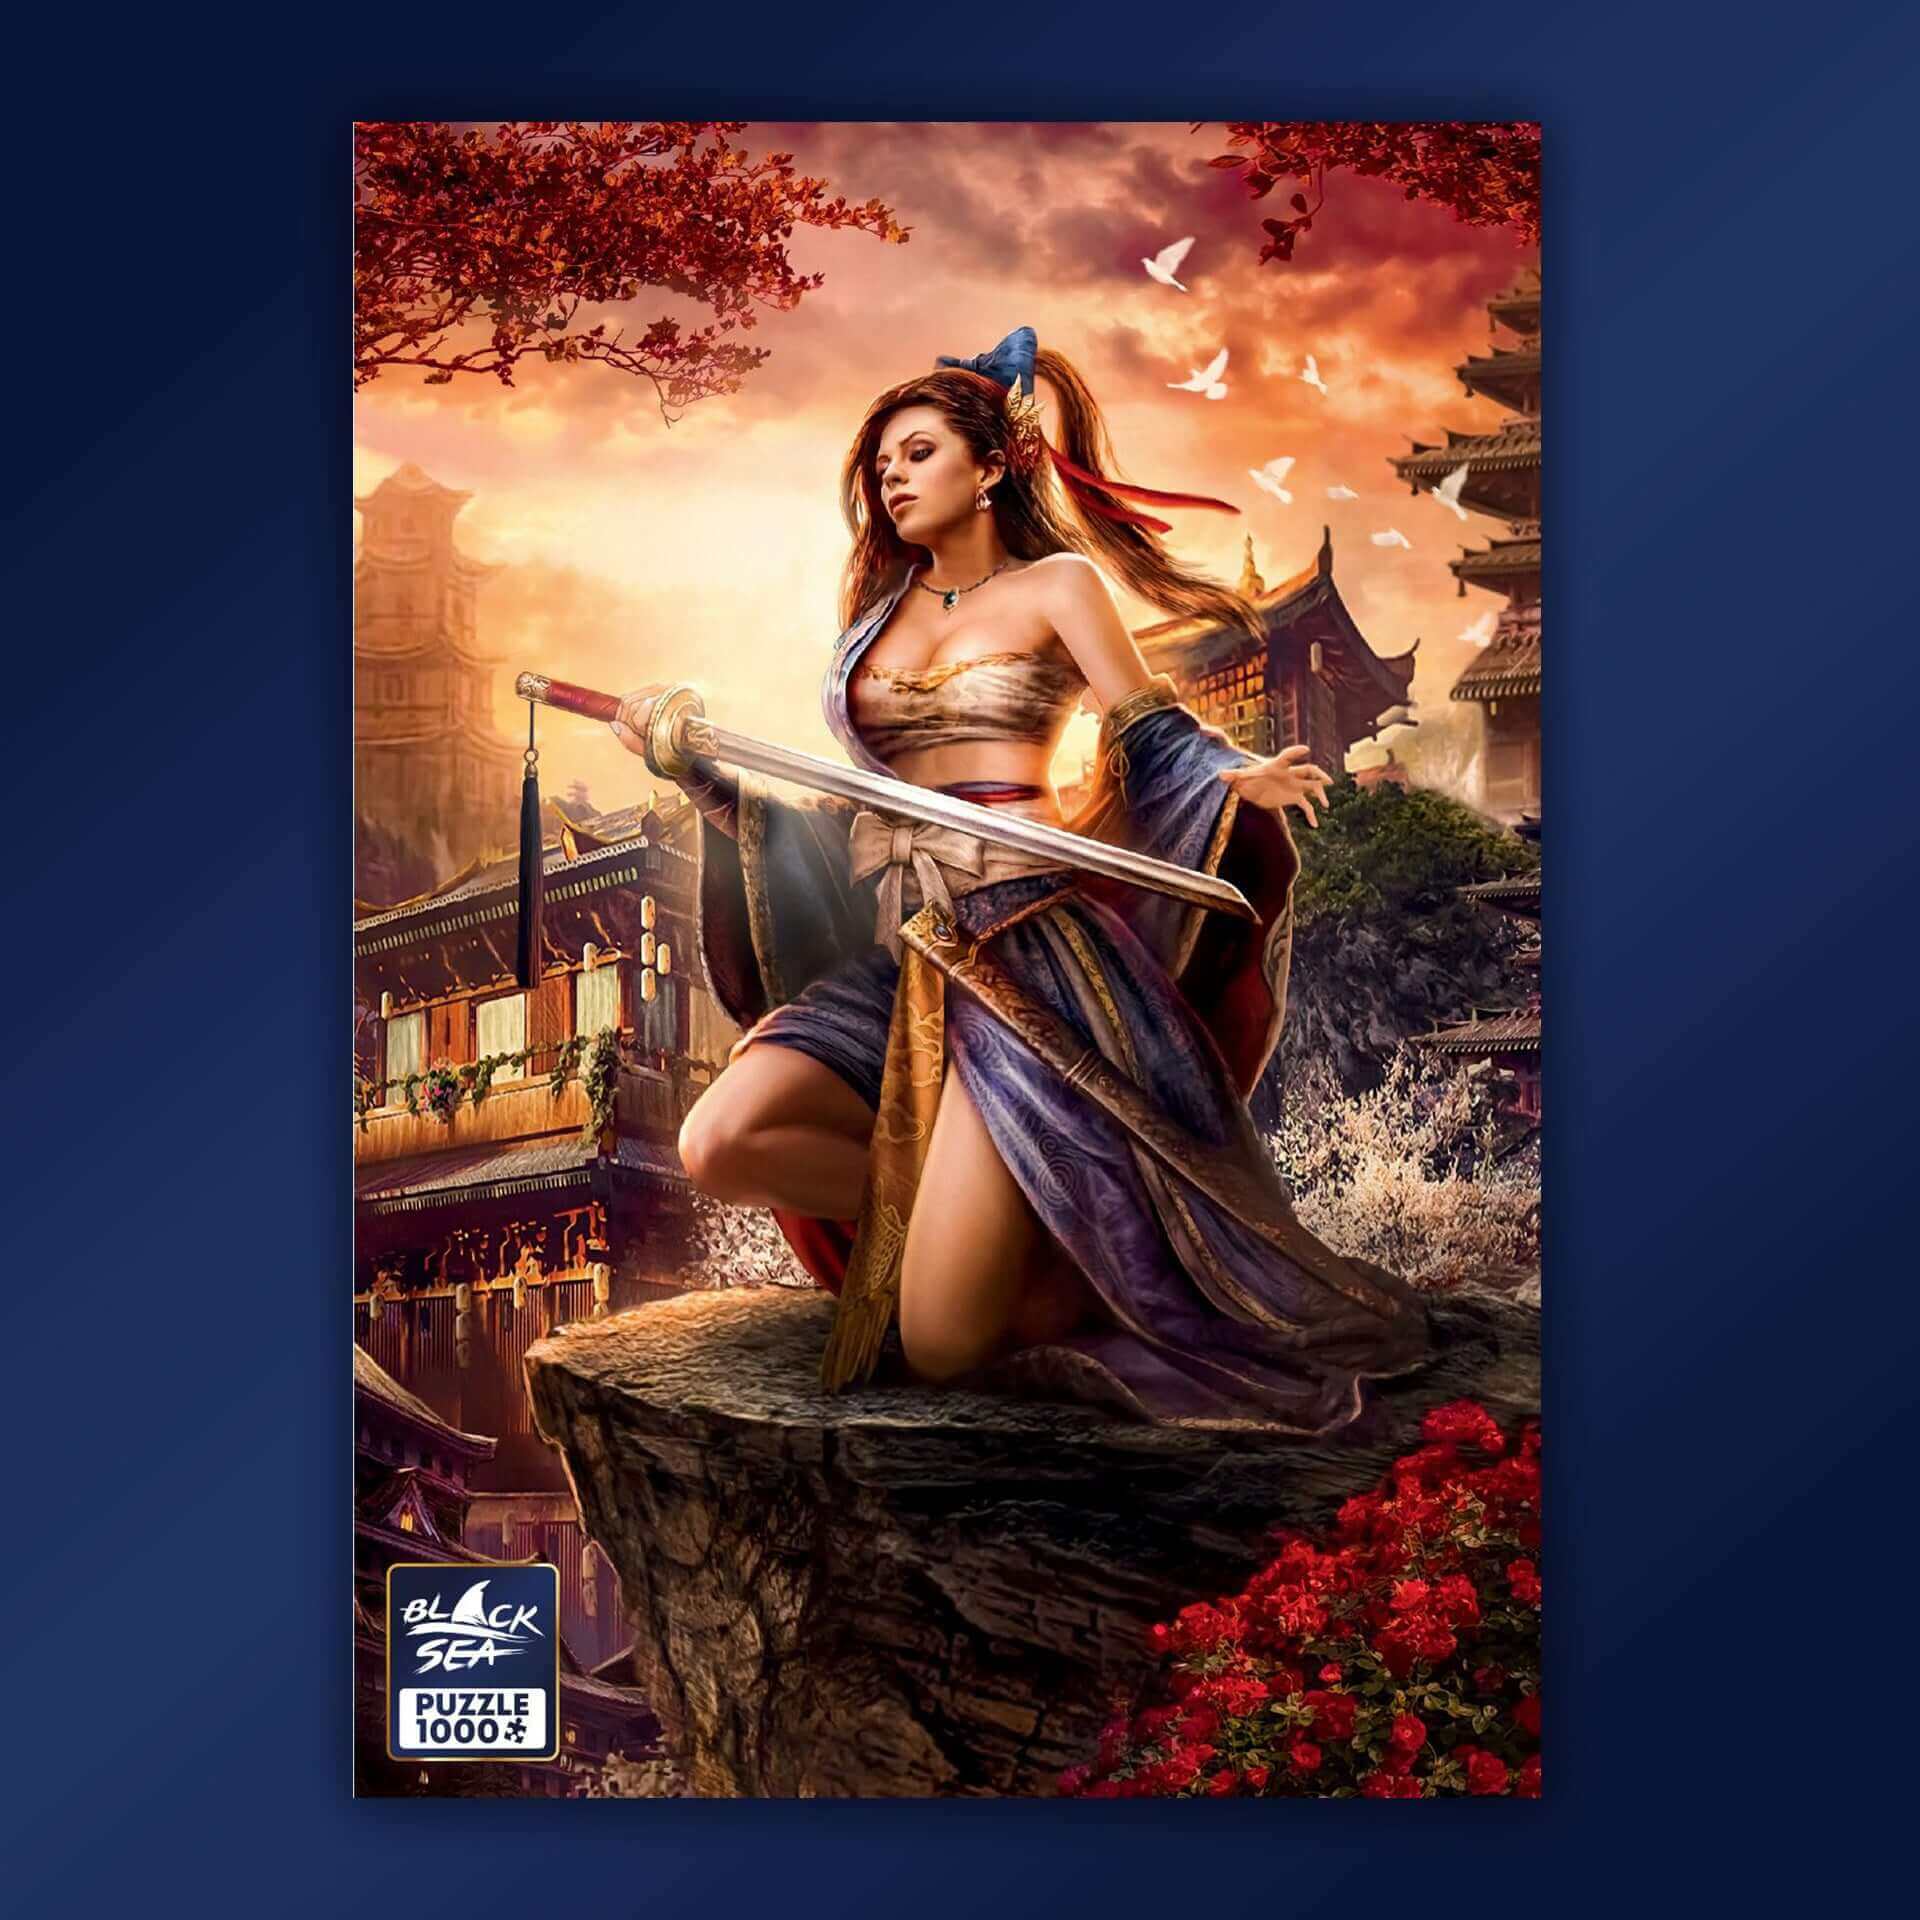 Puzzle Black Sea Premium 1000 pieces - Ronin, Mysterious and unpredictable, the woman warrior combines the beauty of the dance and the inevitability of death. Her fate has forever sealed her and her sword, that is much more than a weapon - it is her faith